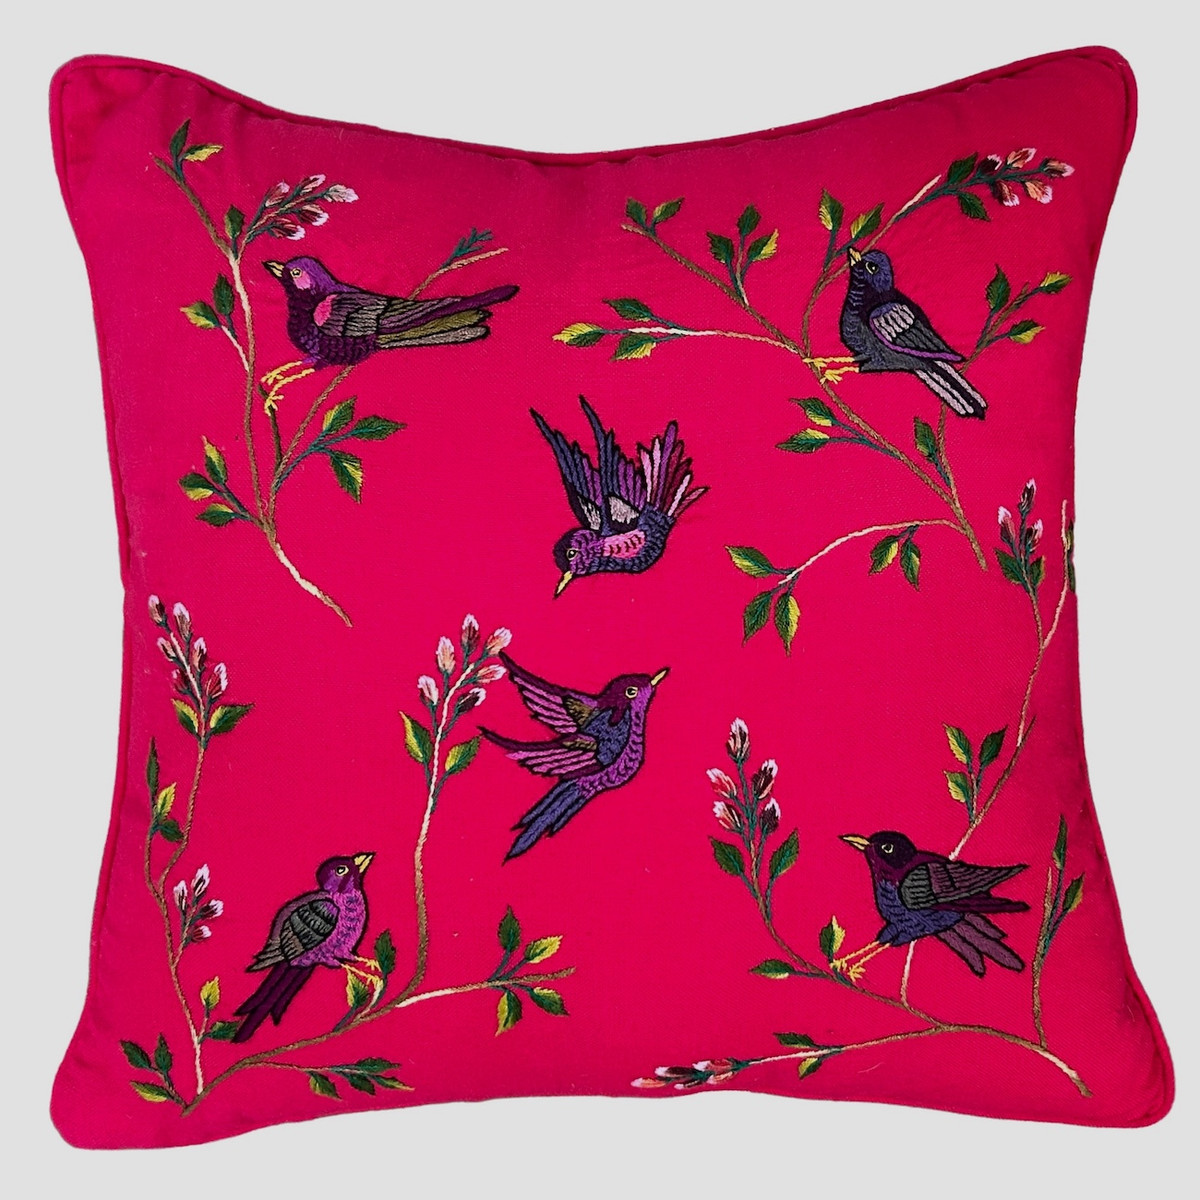 Handwoven and Hand Embroidered Bird Pillow Rose Guatemala (18" x 18") purples, pinks, brown, greens and black.